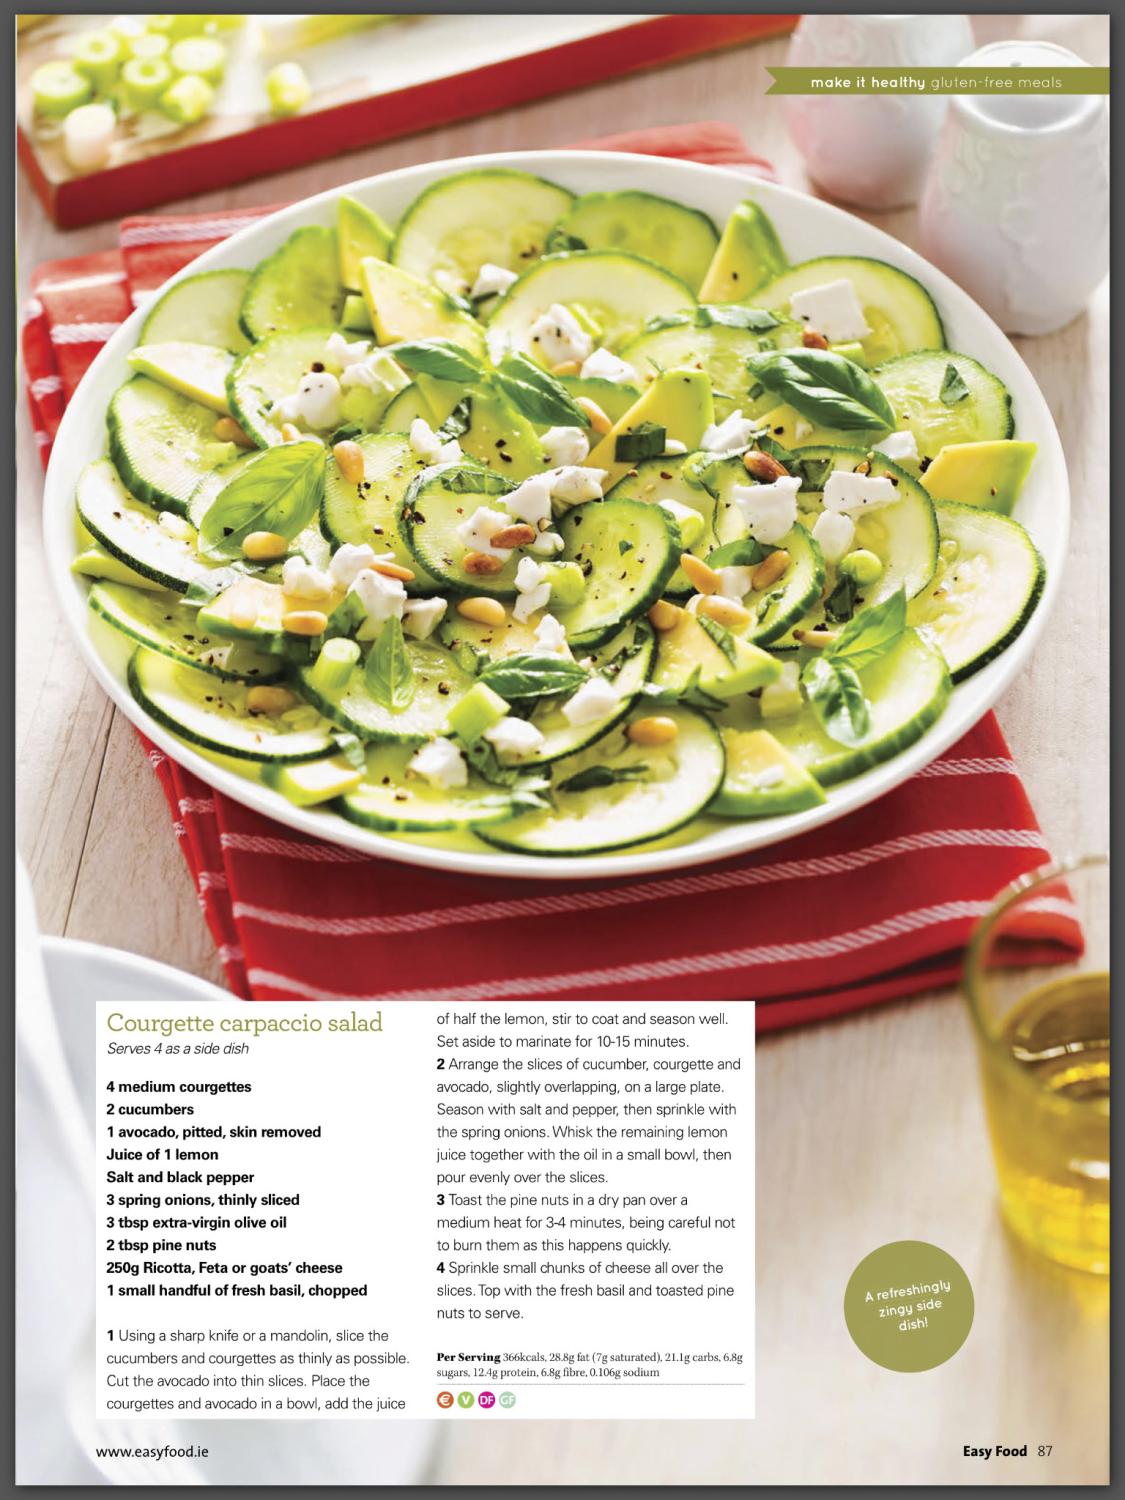 Easy Food, Spring feature 